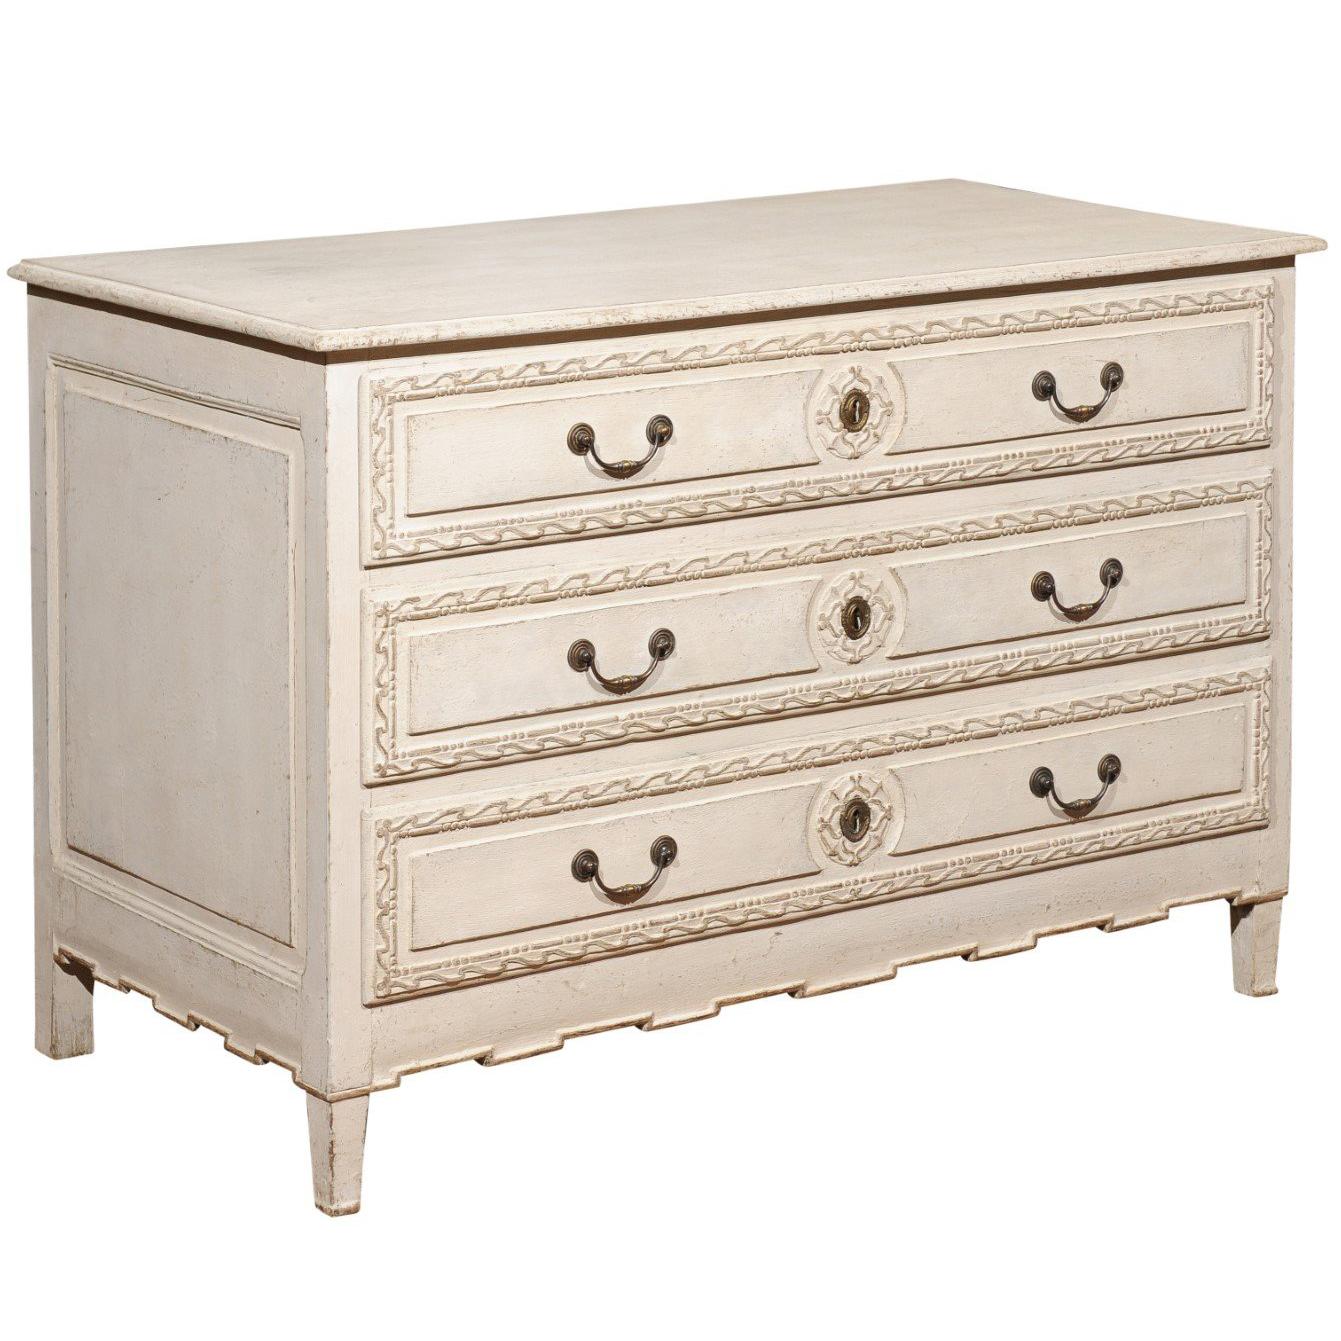 Belgian Directoire Style Painted Three-Drawer Commode with Wavy Patterns, 1850s